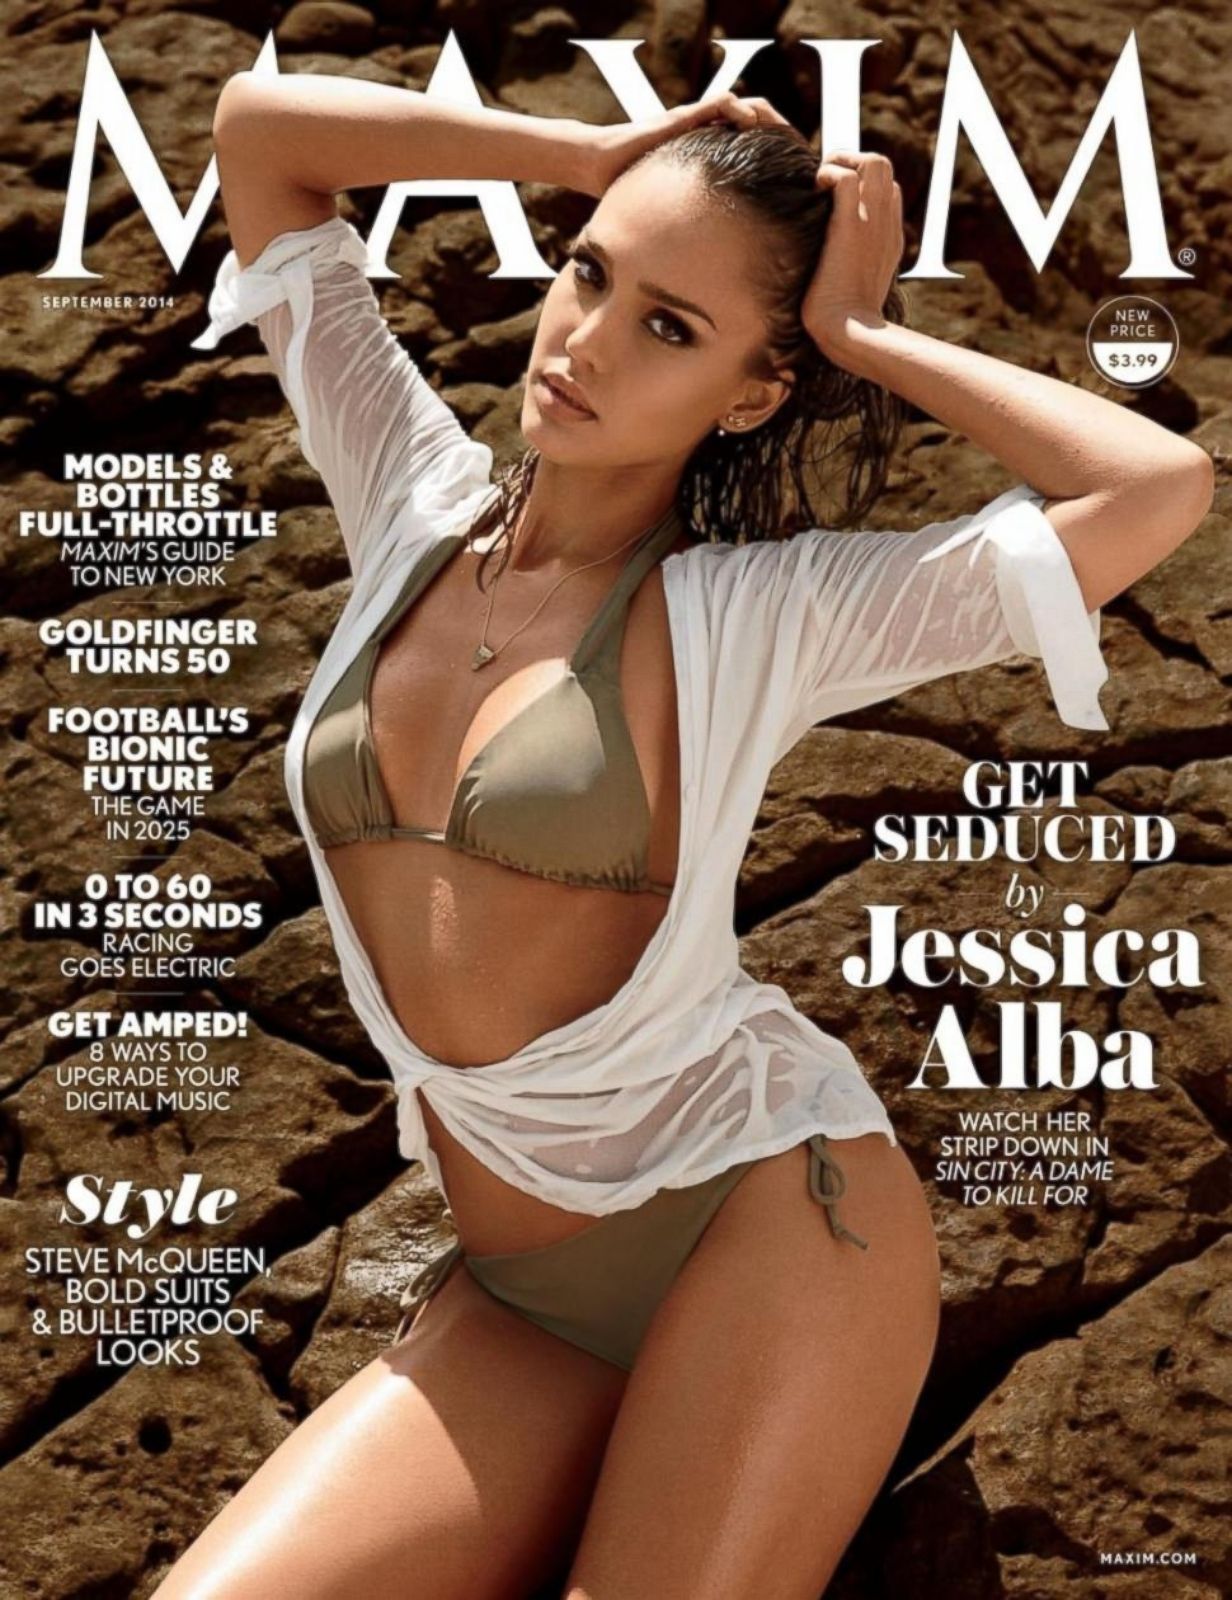 chuck kraus recommends Free Nude Pics Of Jessica Alba